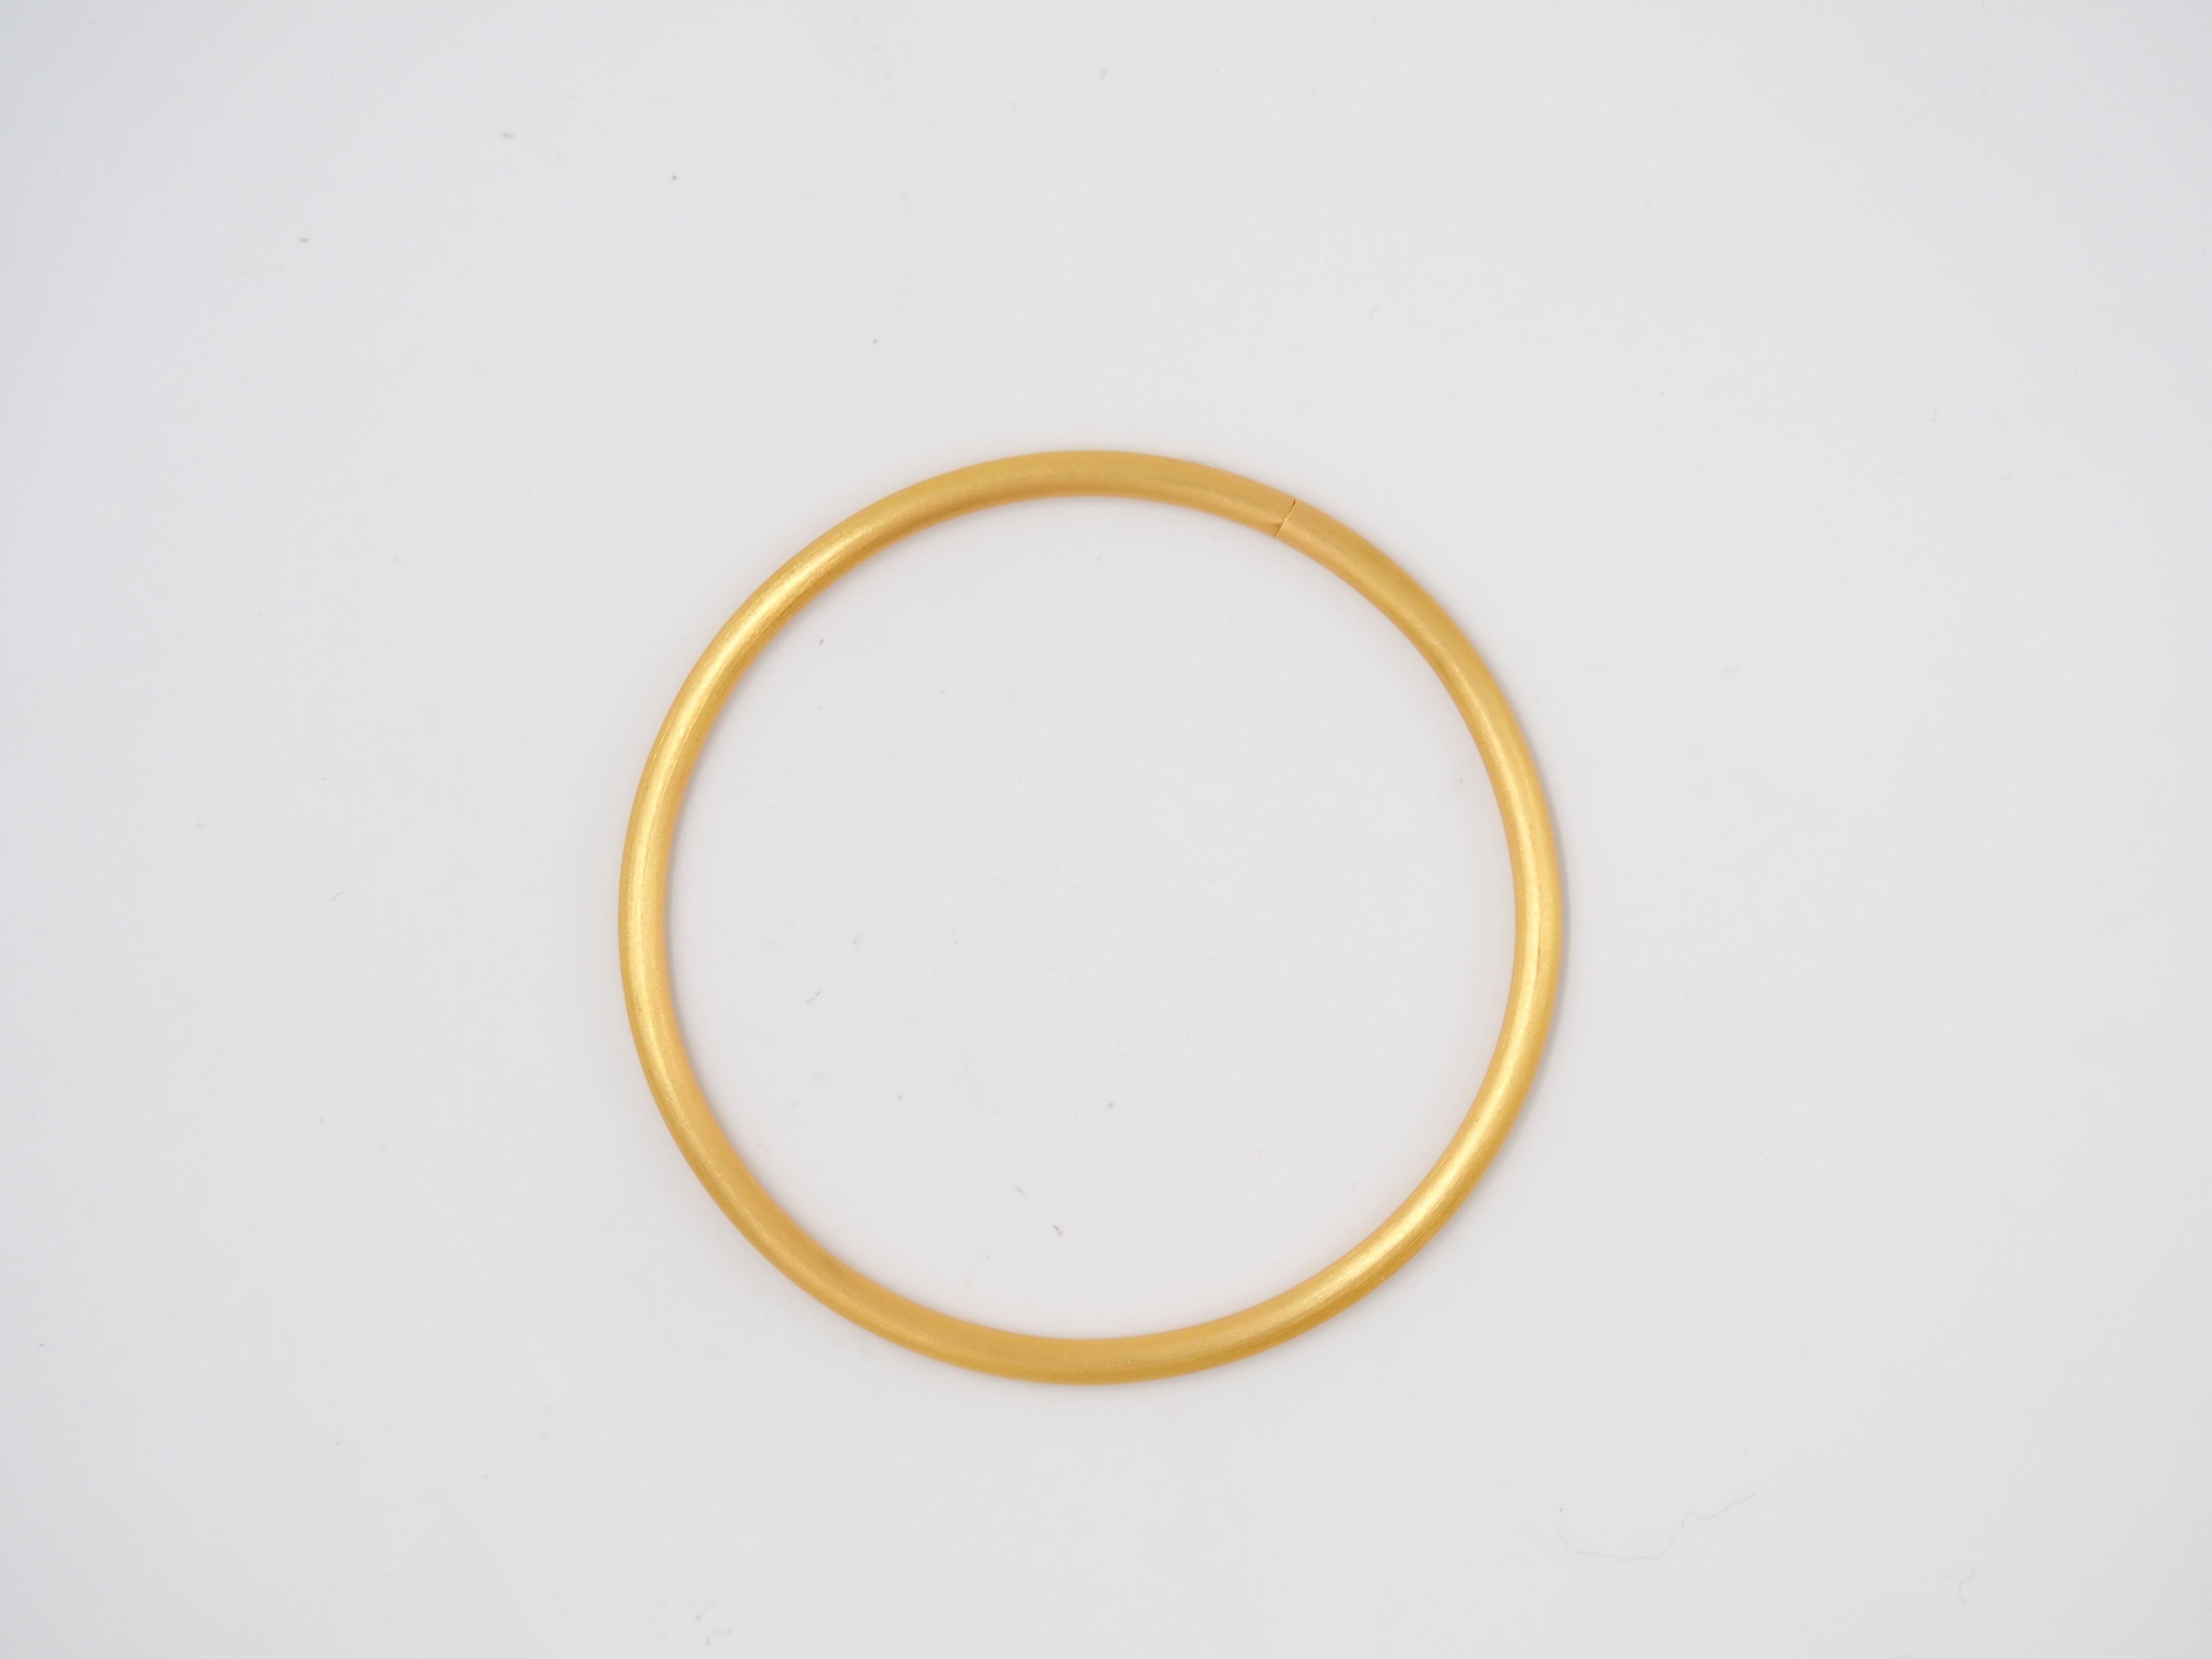 This simple bangle has a round shape and has a gold mat finish. The bangle is handmade in gold 20kt and hollow. 
It is 3mm thick, which allows you to add charms like on the photo! The charms are not included but if you wish to add some, do not